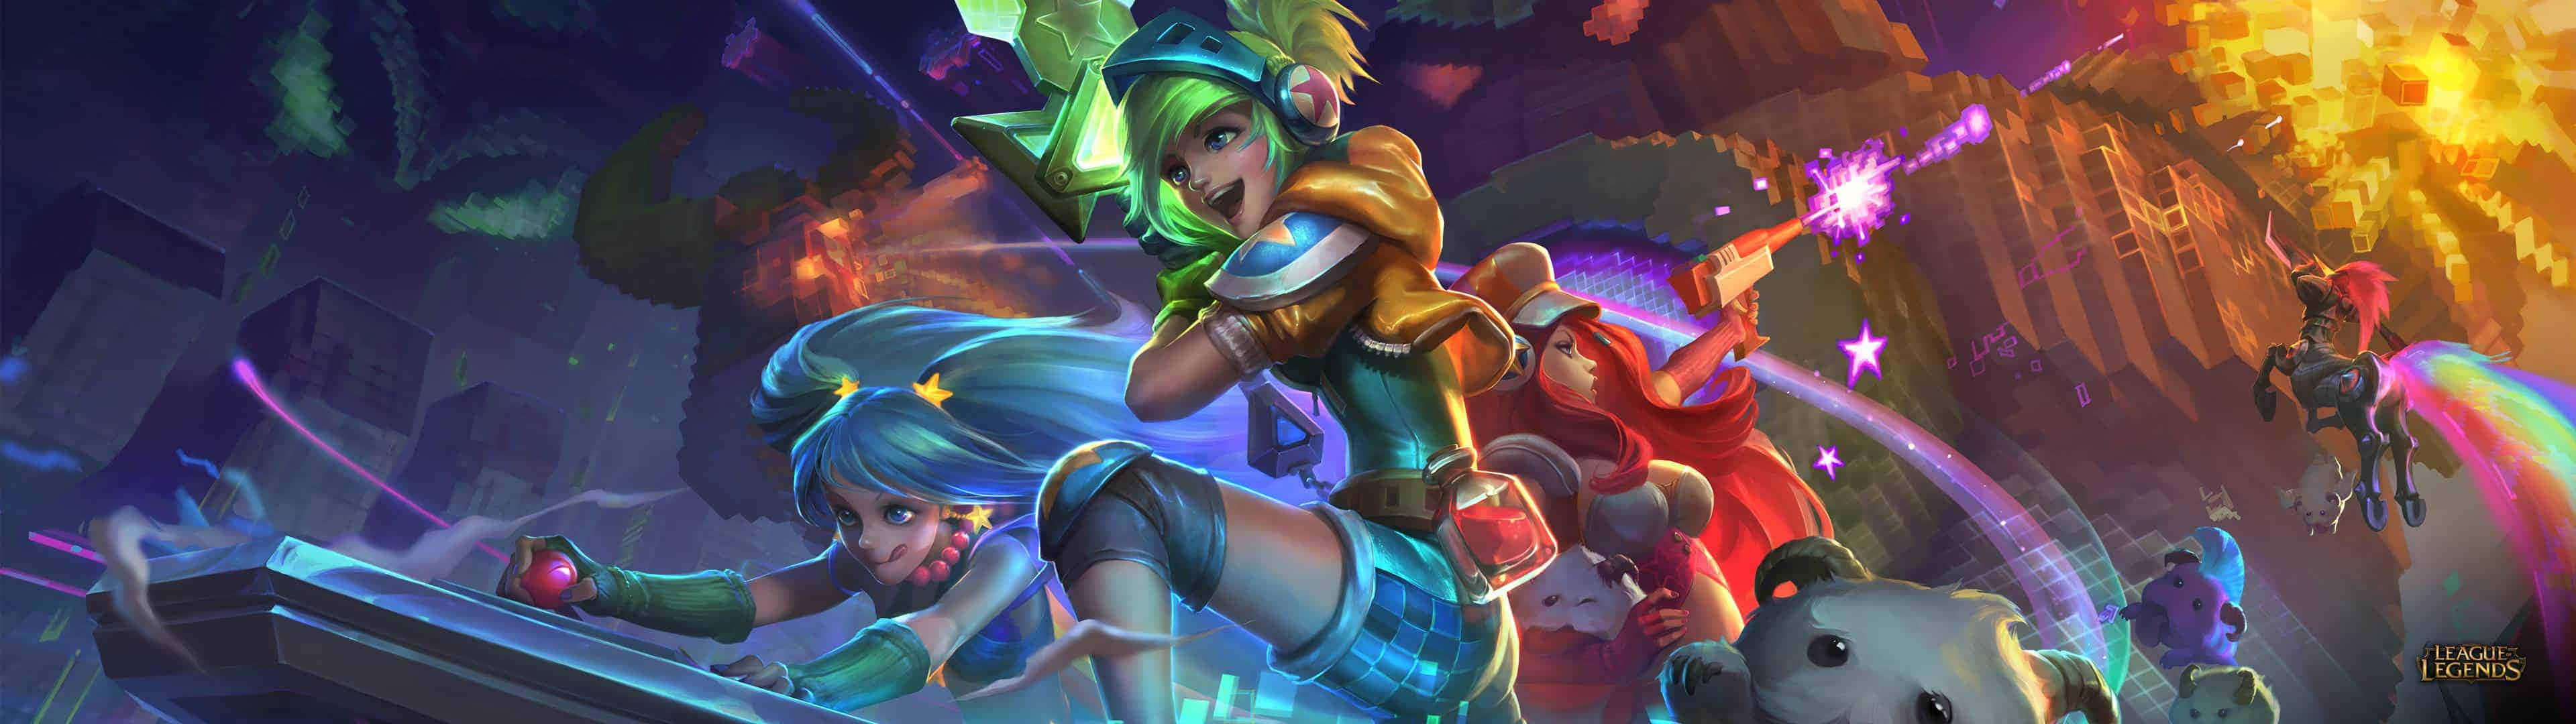 Immerse yourself in the world of the ‘League of Legends’ video game. Wallpaper